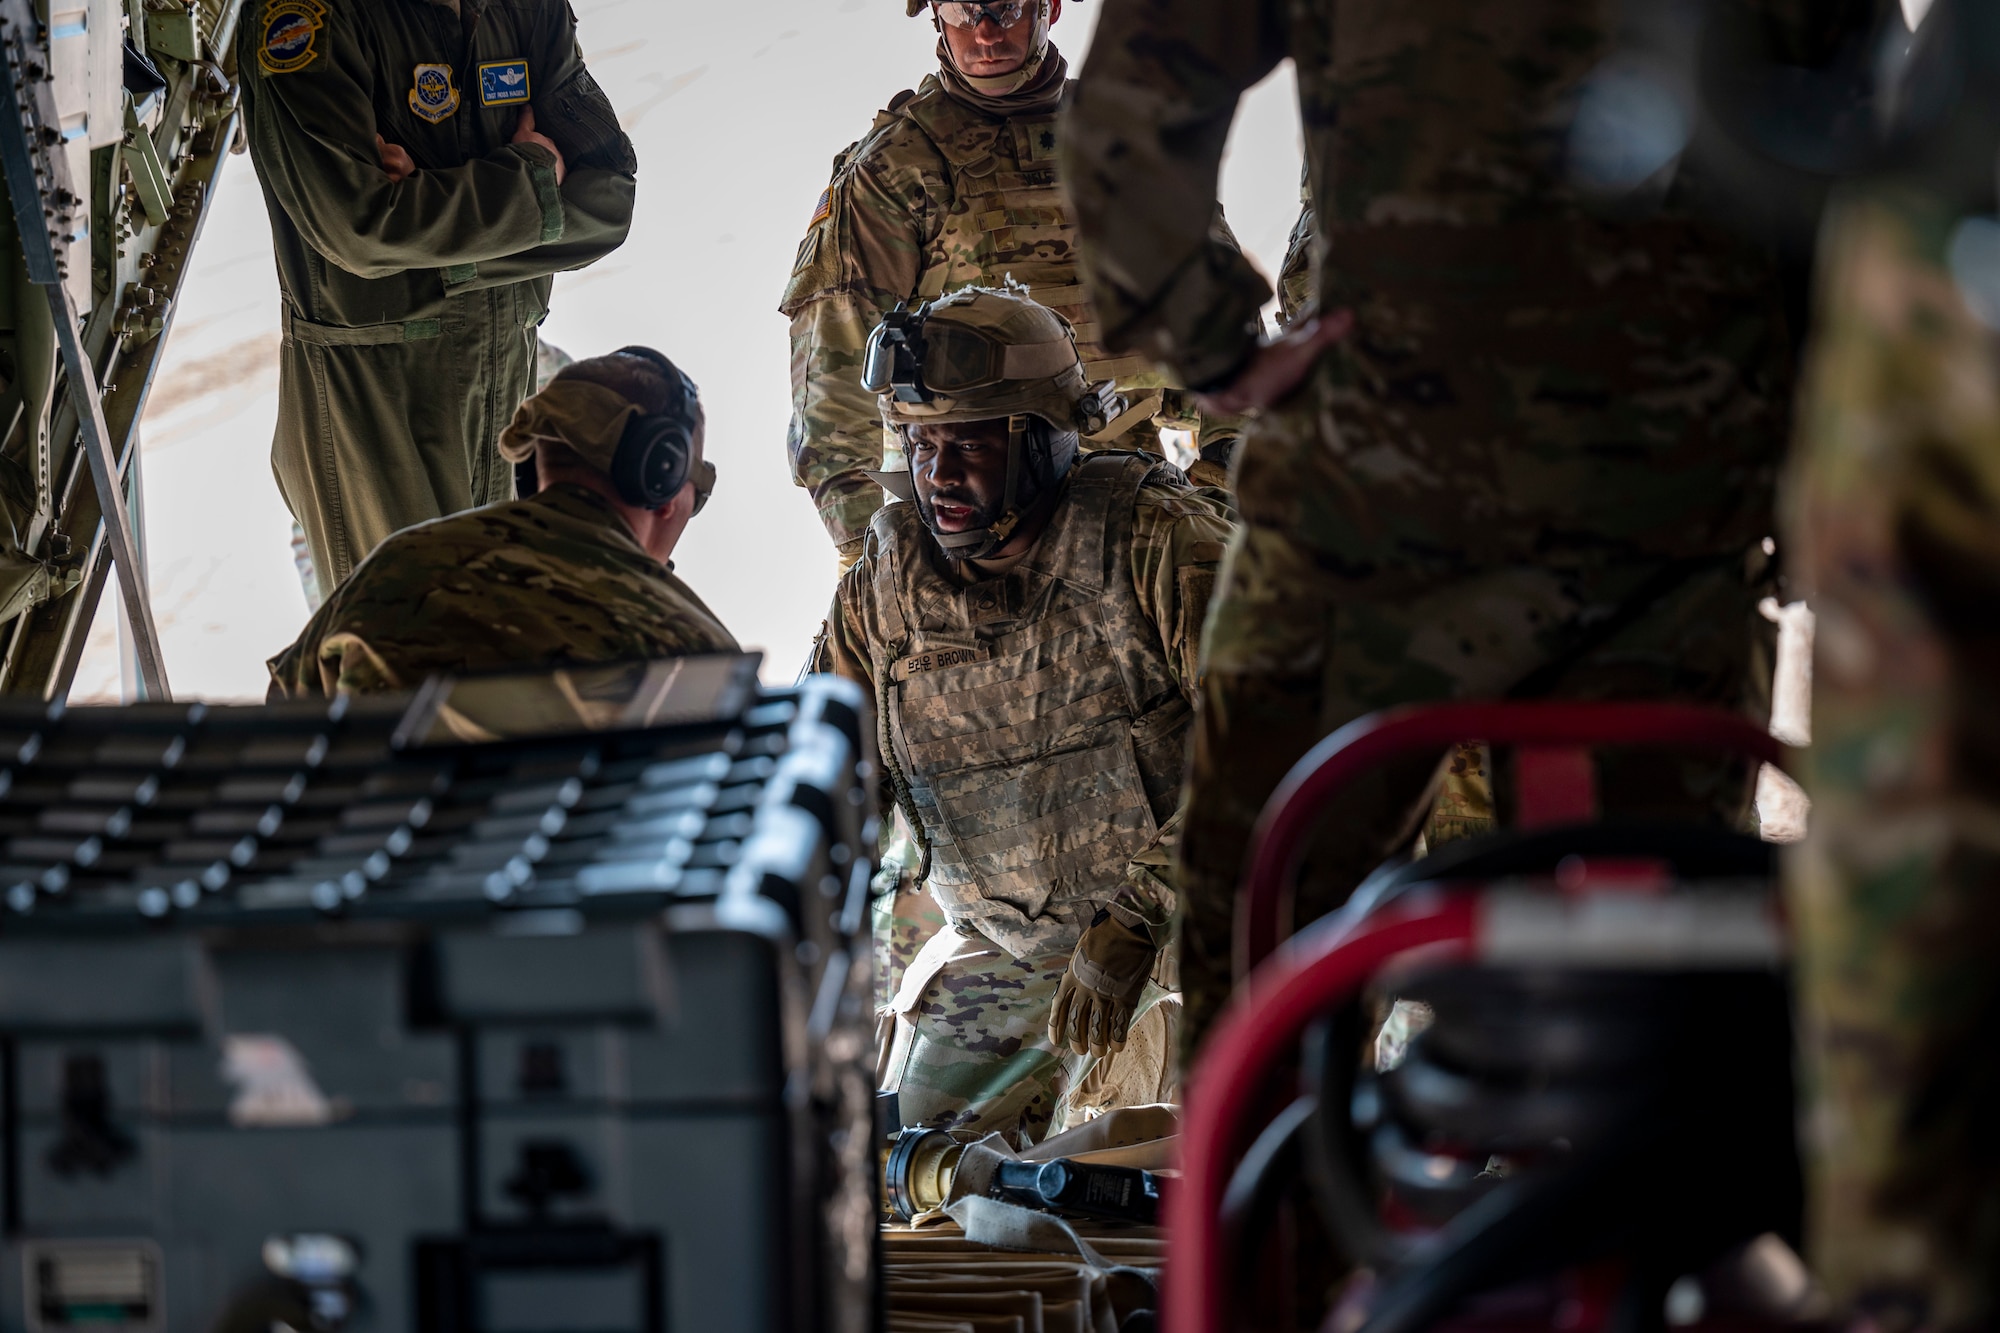 U.S. Army members assigned to the 1st Armored Division discuss preparations with 40th Airlift Squadron Airmen to refuel a M1A2 Abrams tank at Fort Bliss, Texas, Dec. 9, 2022. This exercise allowed U.S. forces to practice and showcase the interoperability and joint effectiveness for future contingency operations. (U.S. Air Force photo by Senior Airman Leon Redfern)